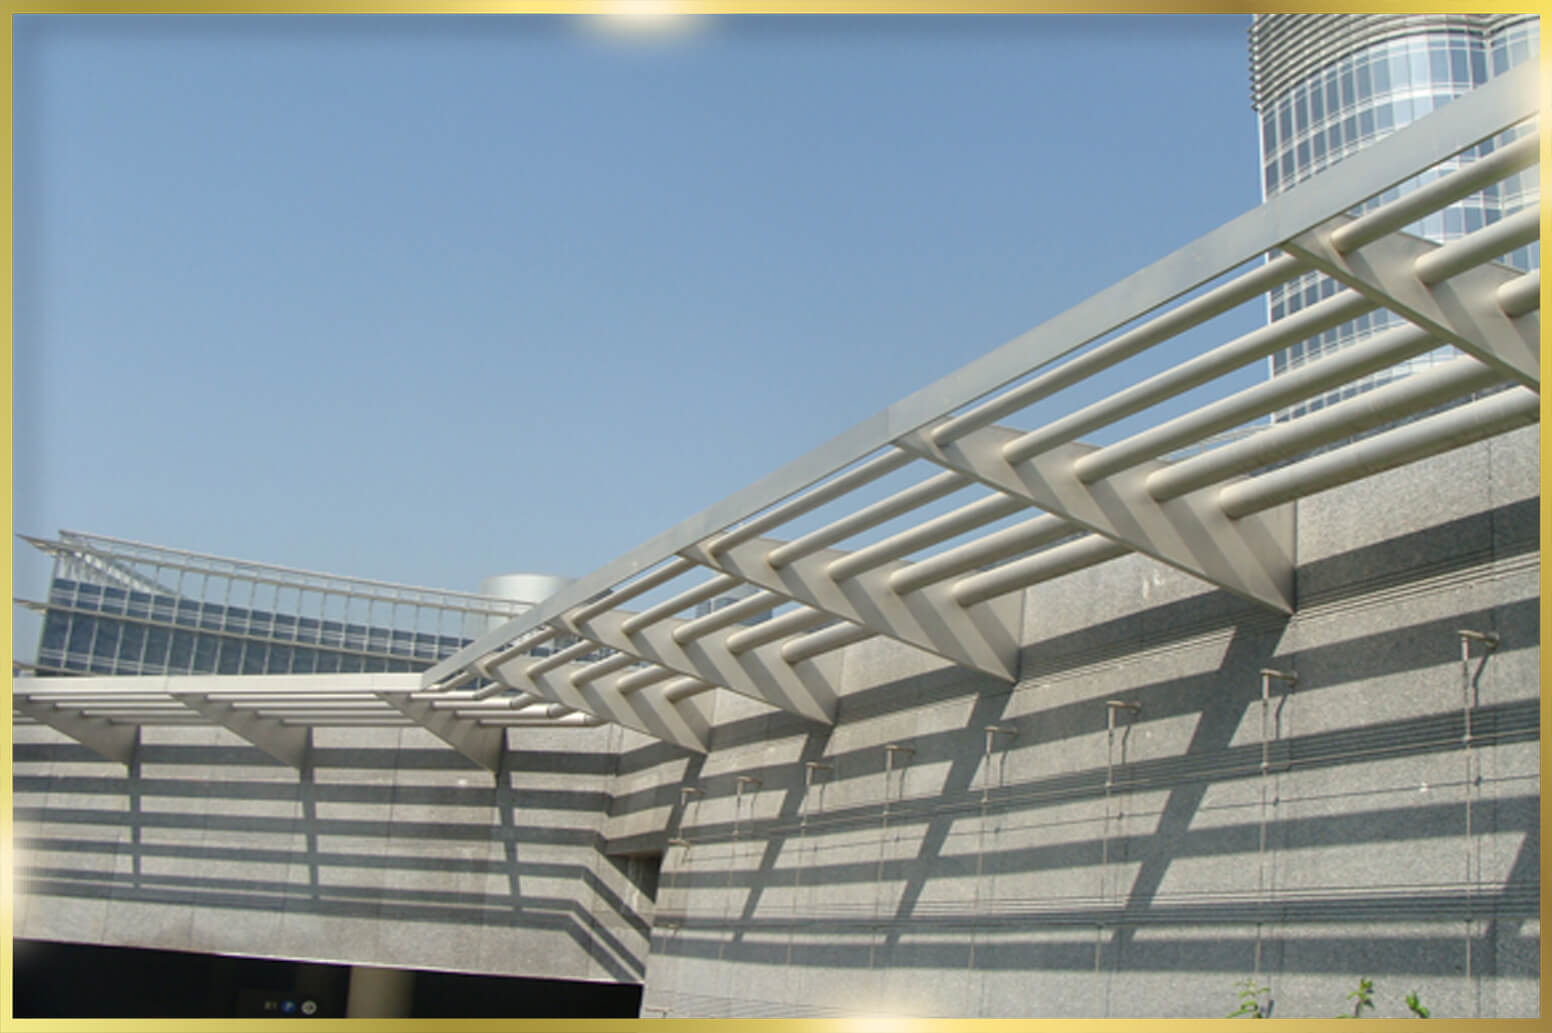 Stainless Steel Architecture in UAE